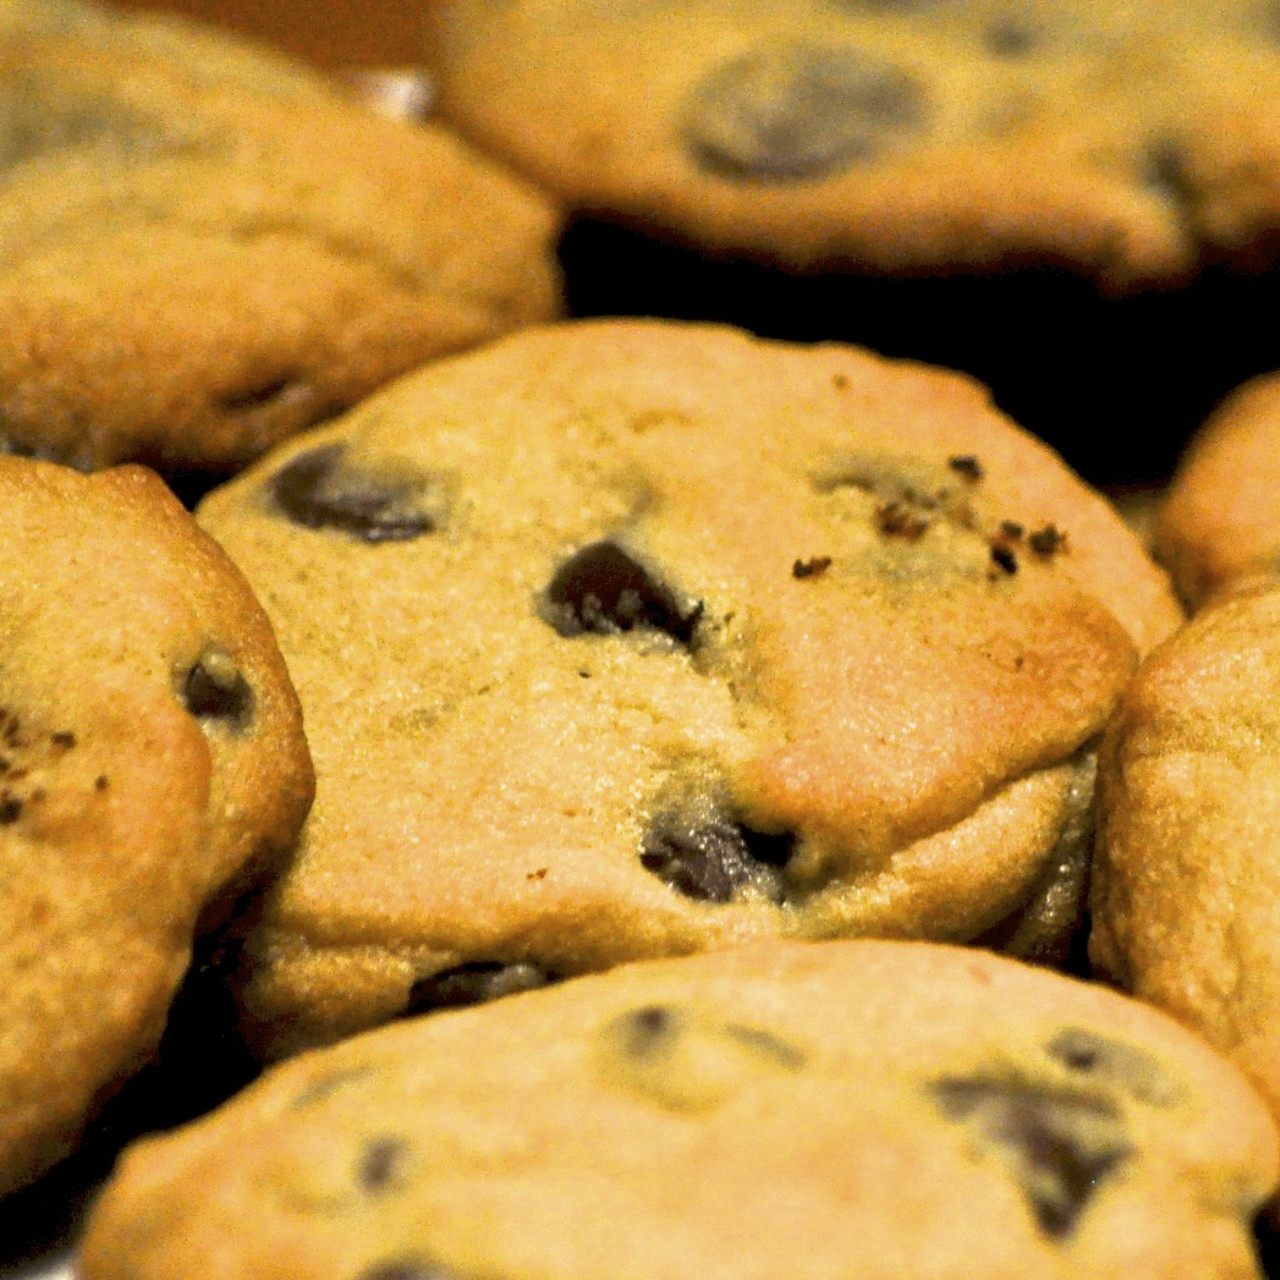 nestle toll house cookie recipe